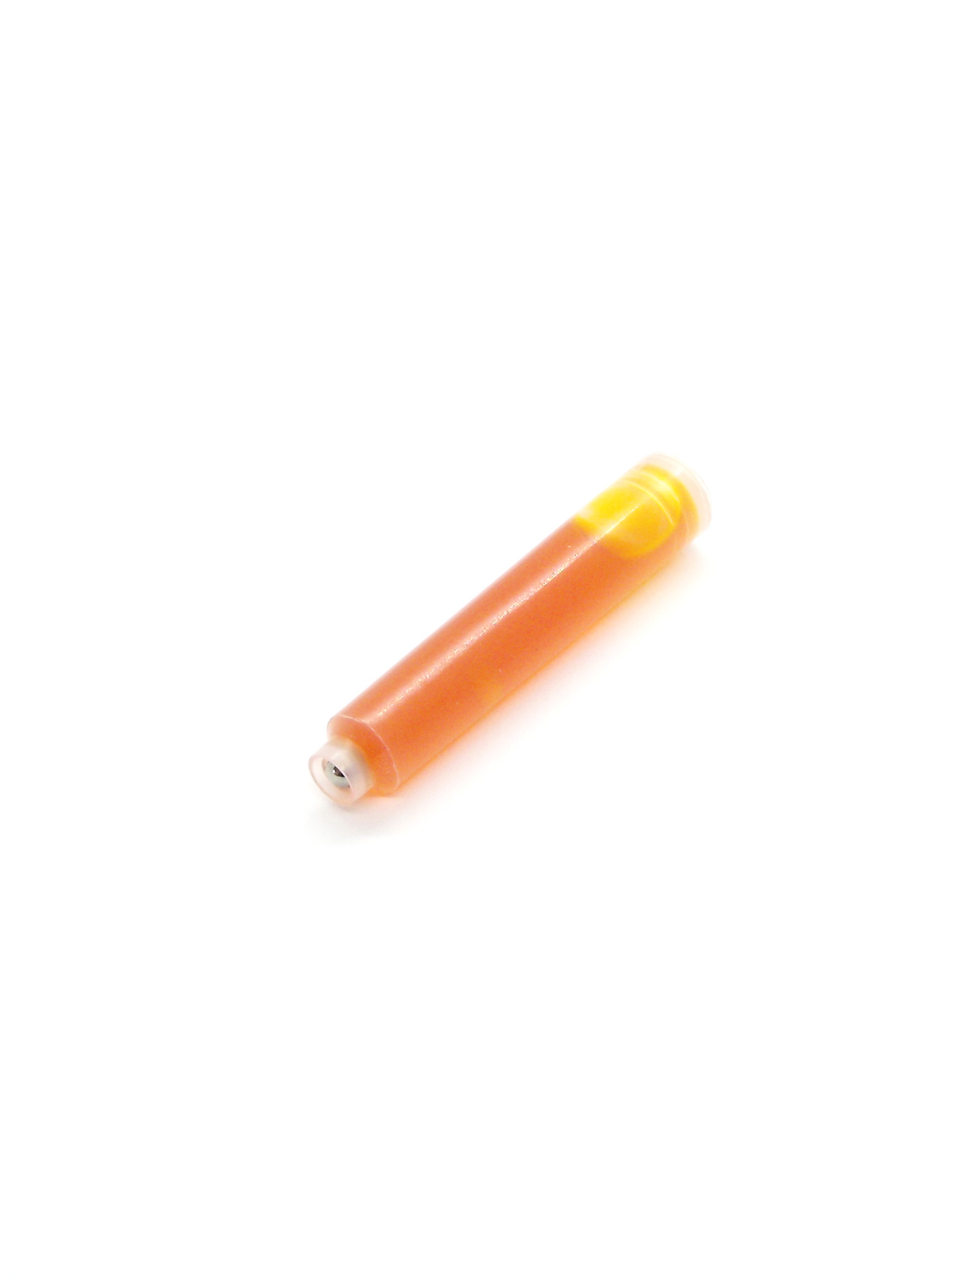 Cartridges For Sizzle Stix Fountain Pens (Yellow)